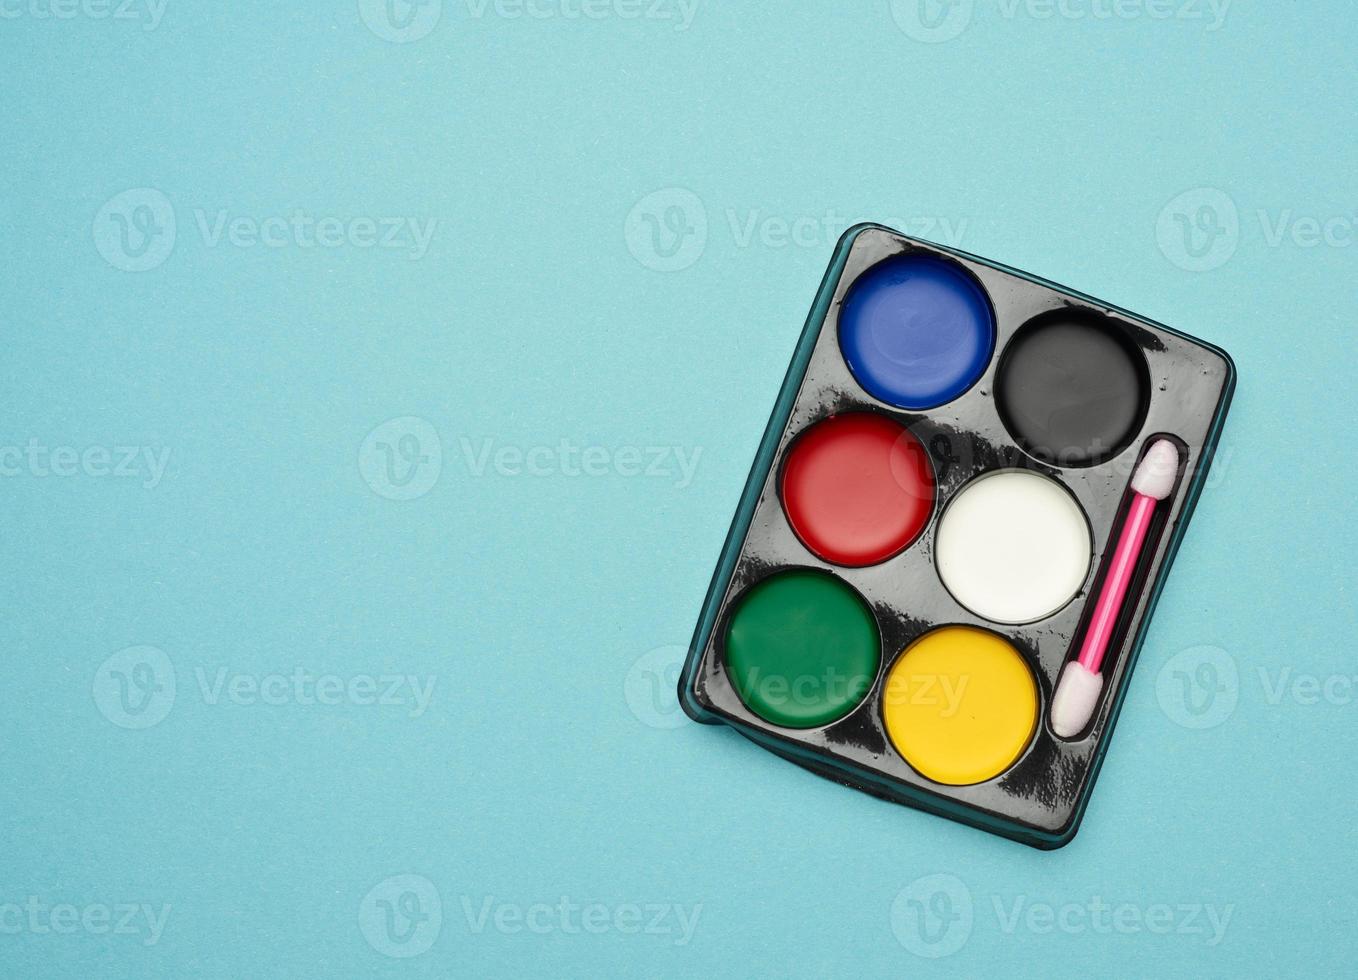 palette with multi-colored makeup paints on a blue background photo